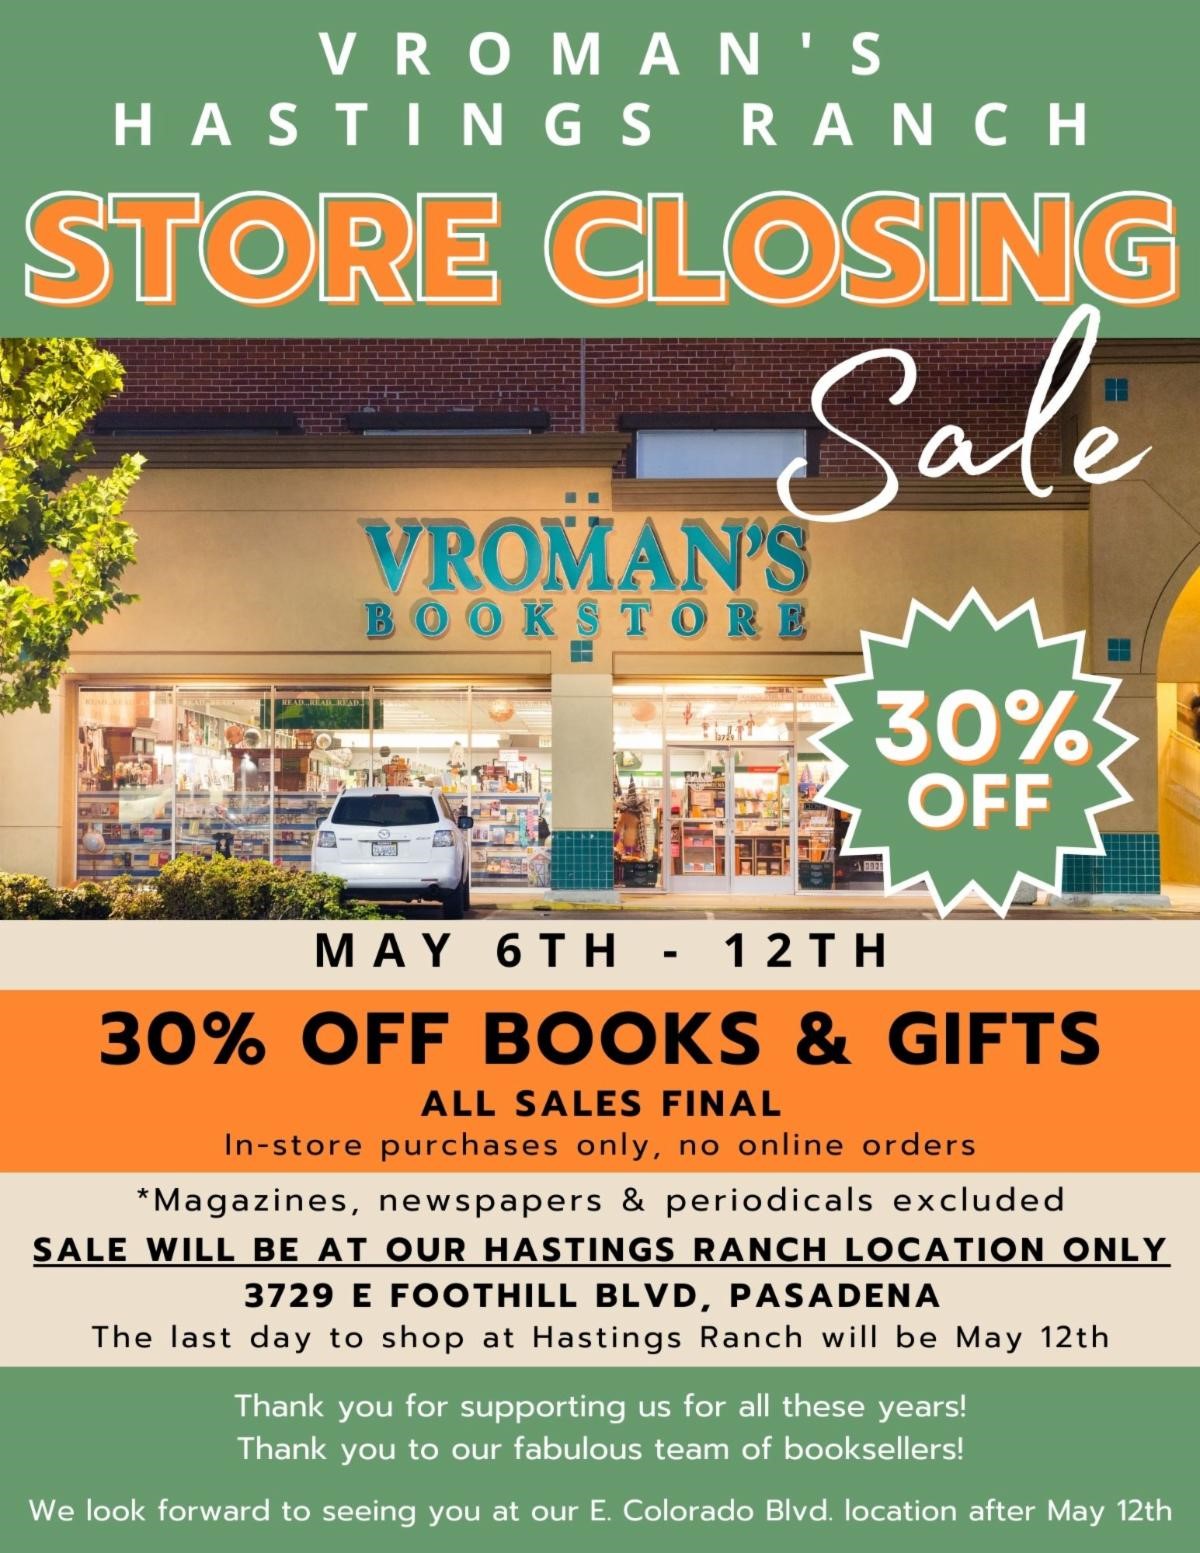 Vroman's hastings Ranch store closing sale ad